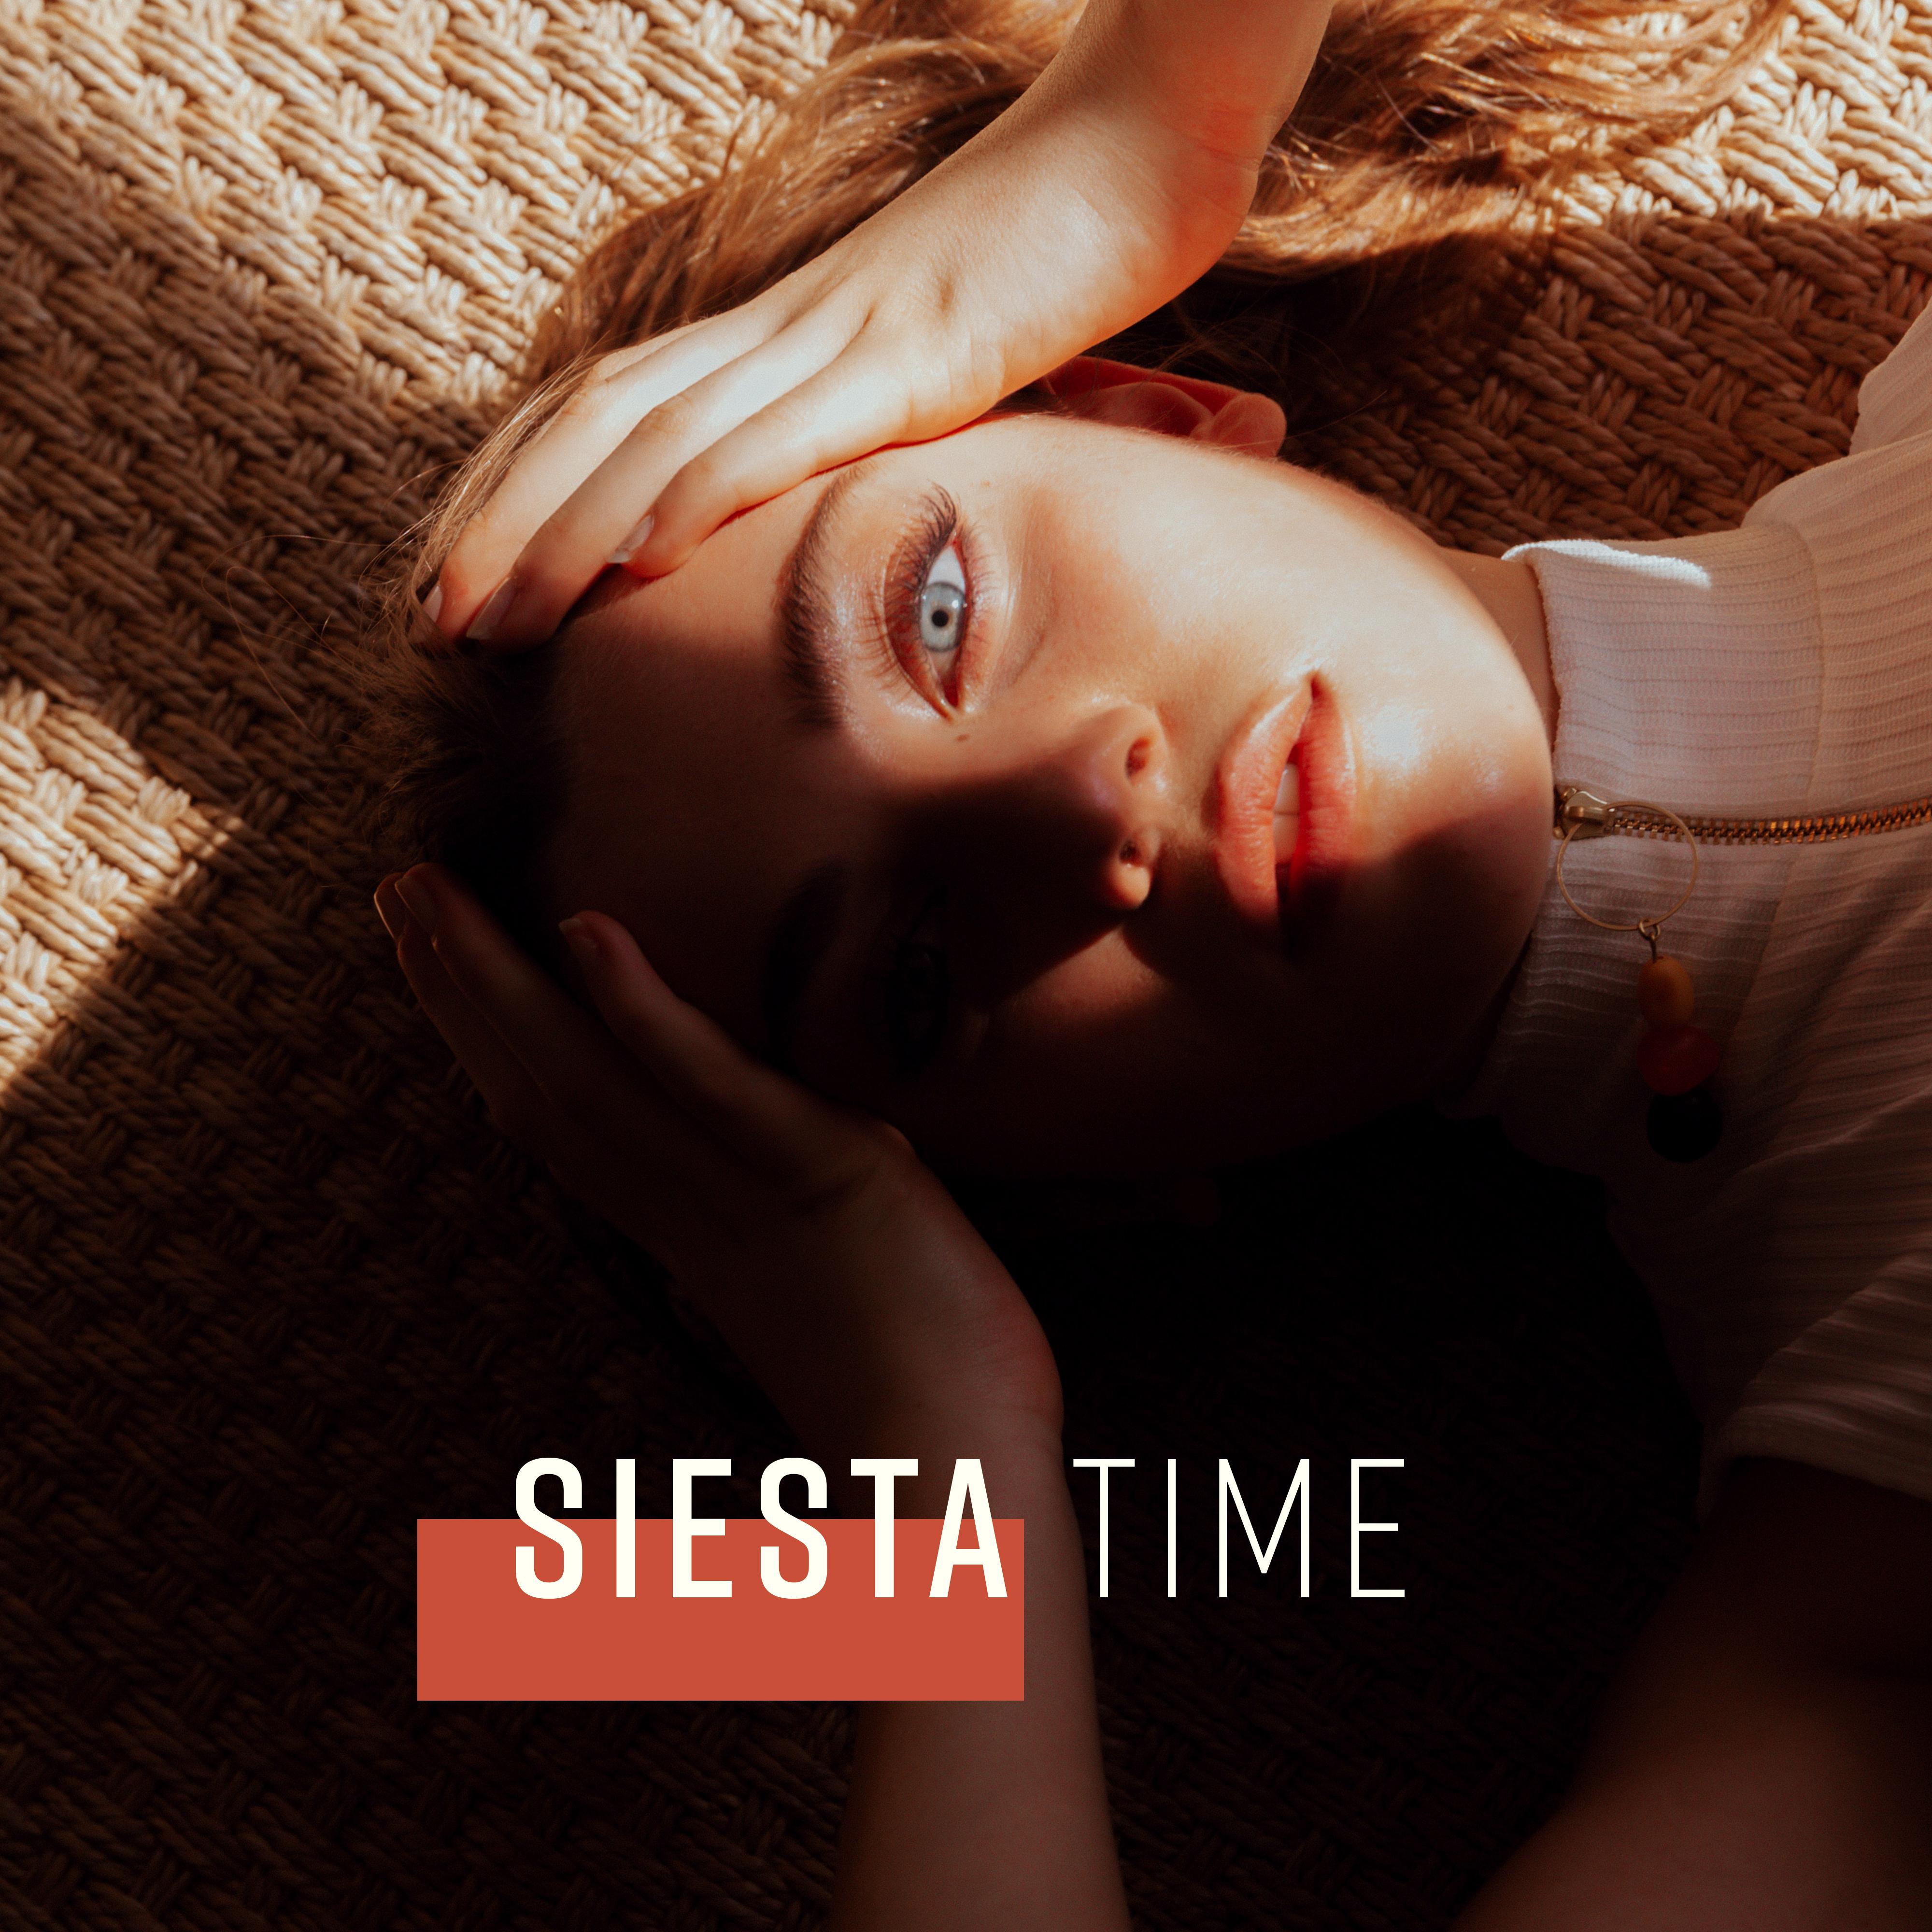 Siesta Time: Time to Relax and Take a Break